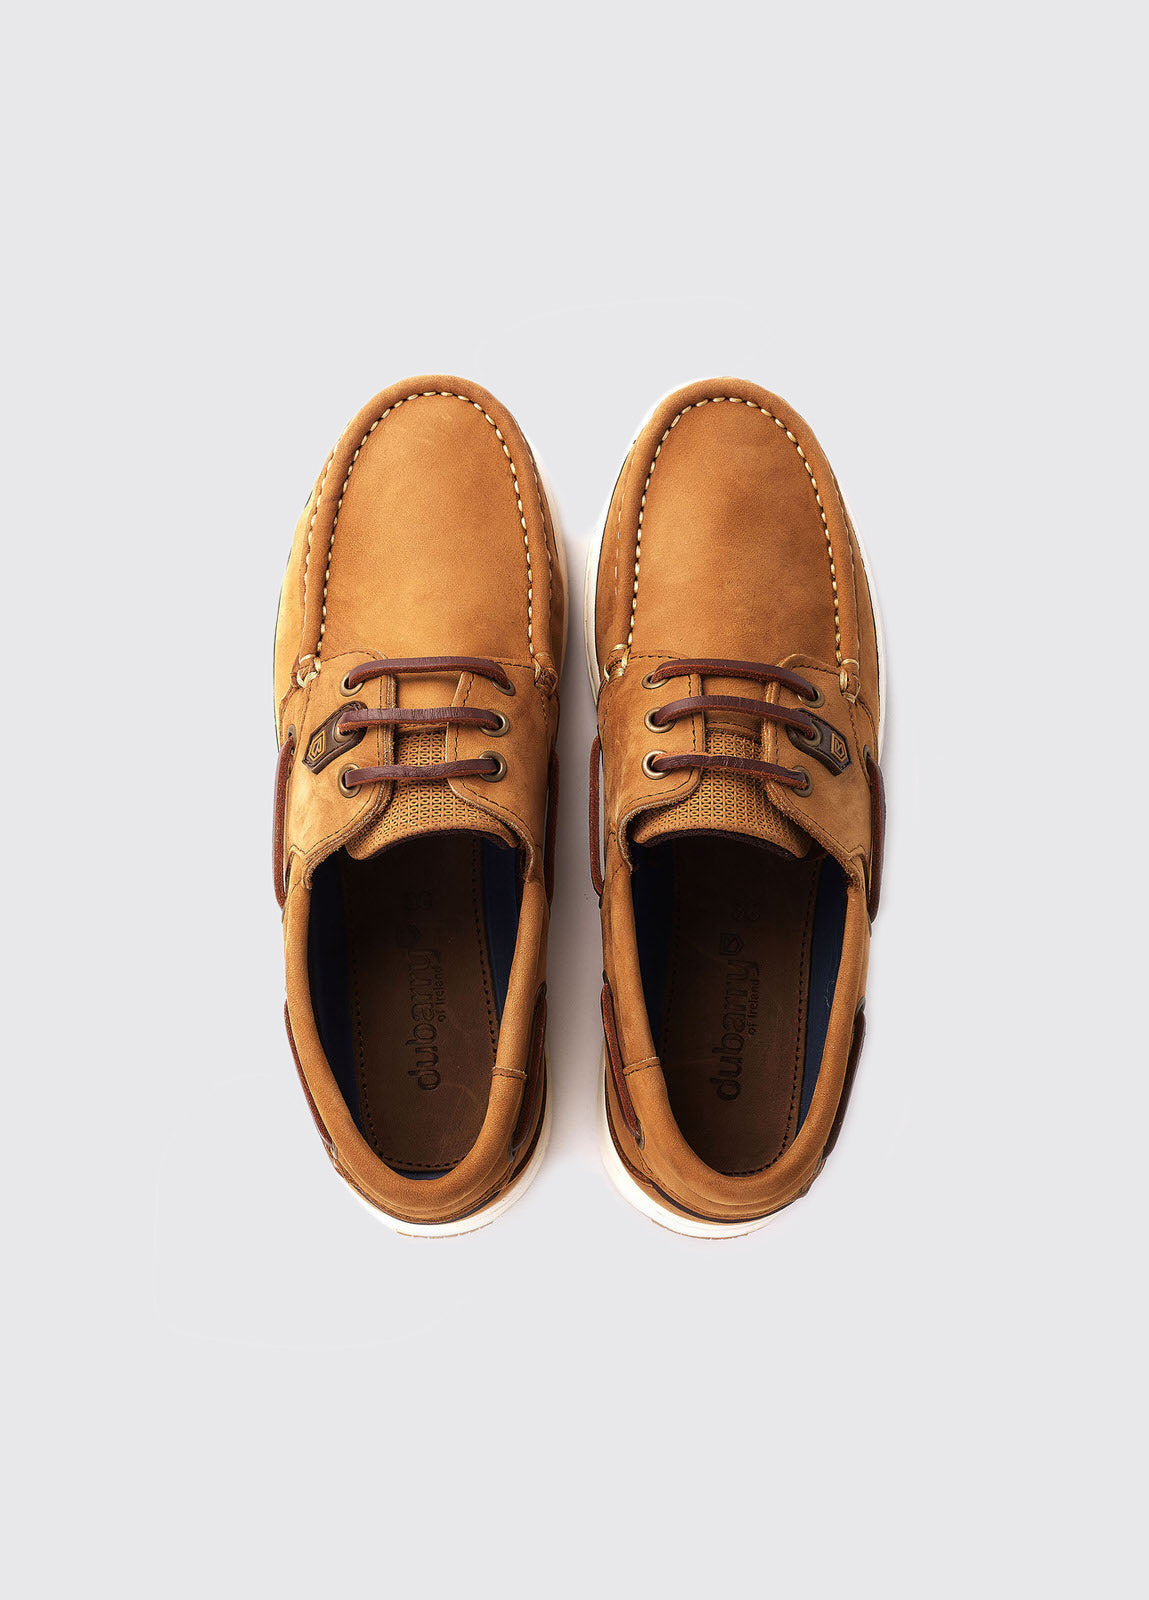 Auckland Loafer - Brown